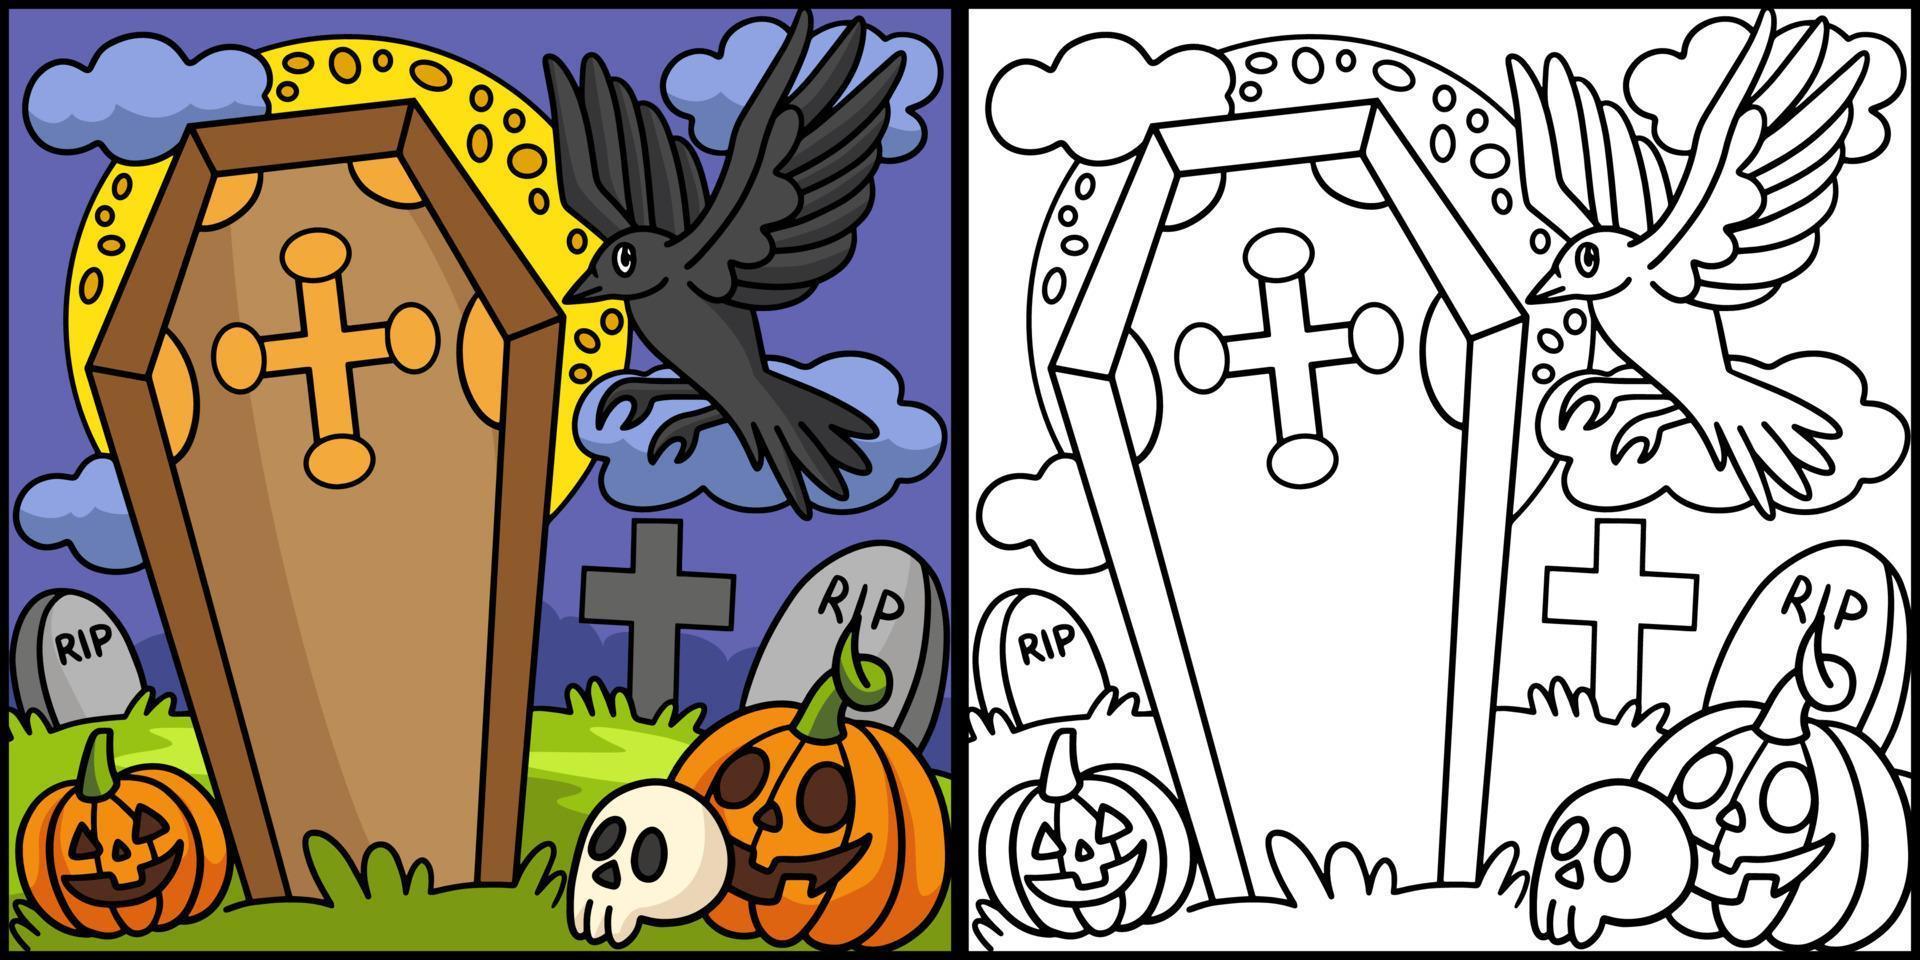 Crows In A Cemetery Halloween Colored Illustration vector